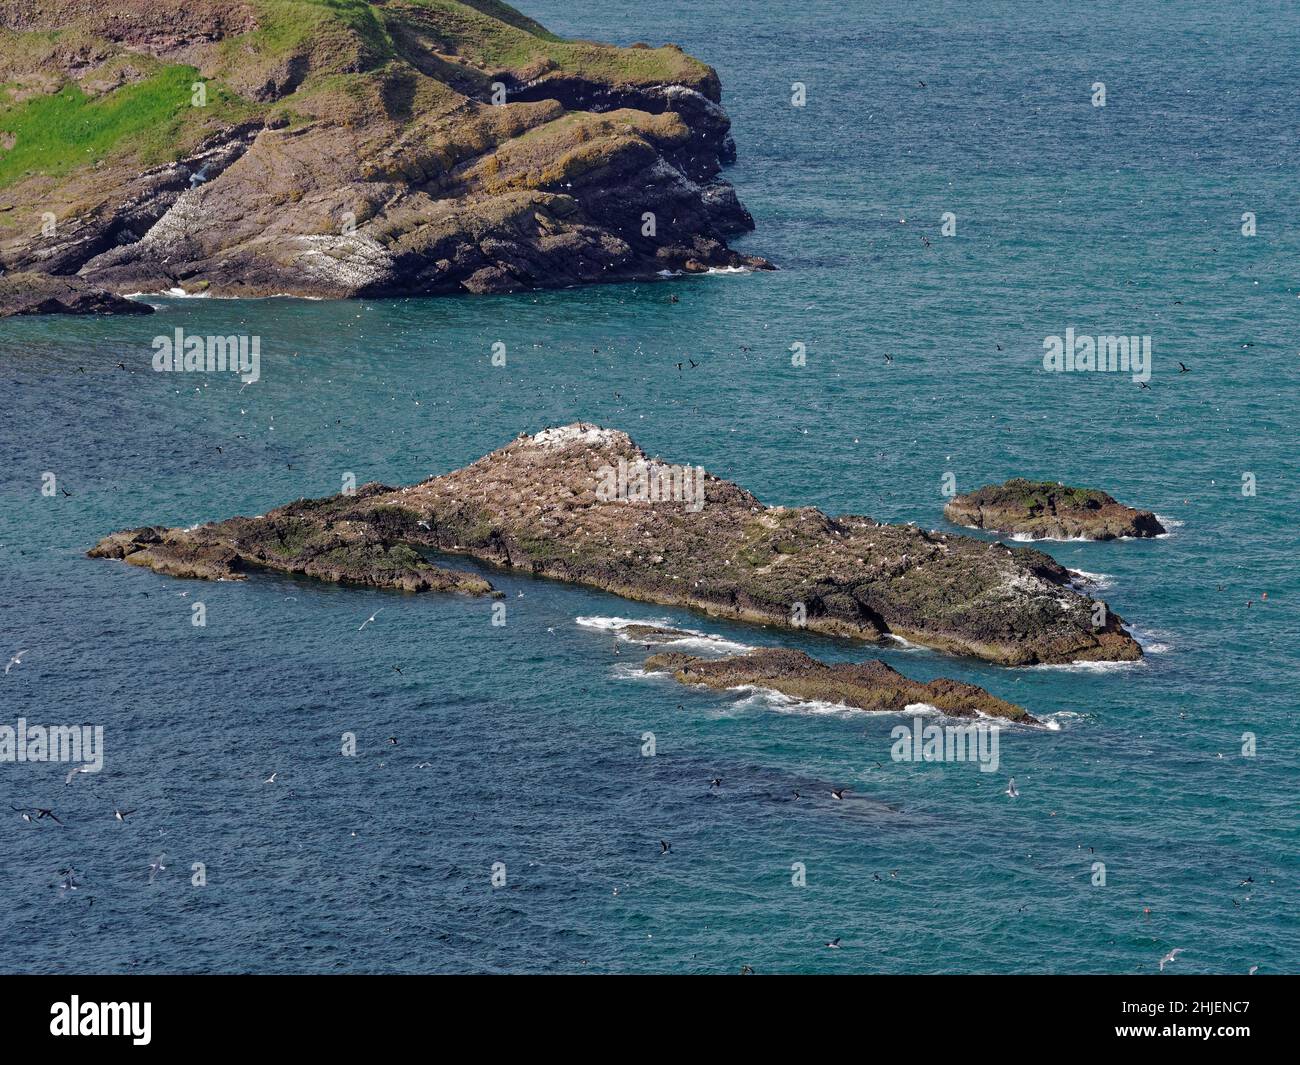 The Craiglethy Rock Outcrop in Trelung Bay covered with Nesting and Flying Seabirds on the Fowlsheaugh Nature Reserve the East Coast of Scotland. Stock Photo